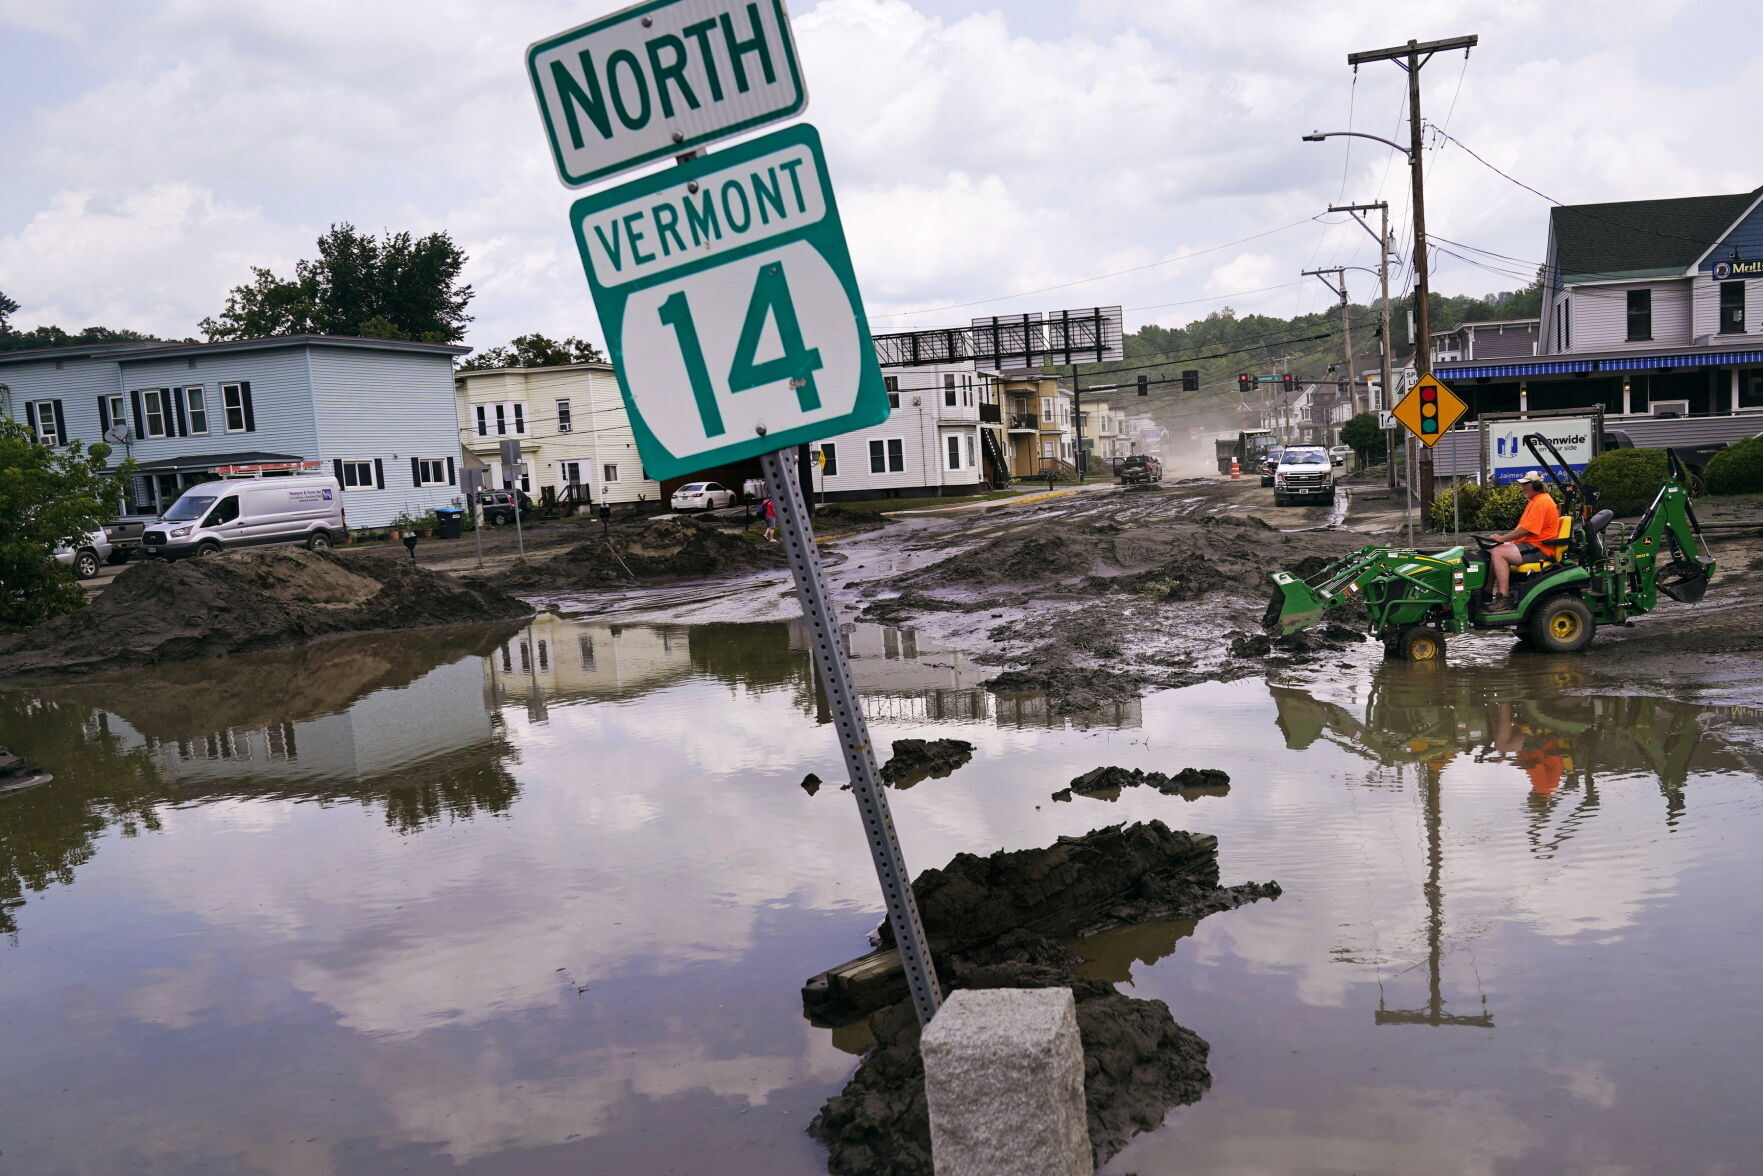 Engineer from PennDOTs Dunmore office assisting with flood recovery in Vermont News thetimes-tribune